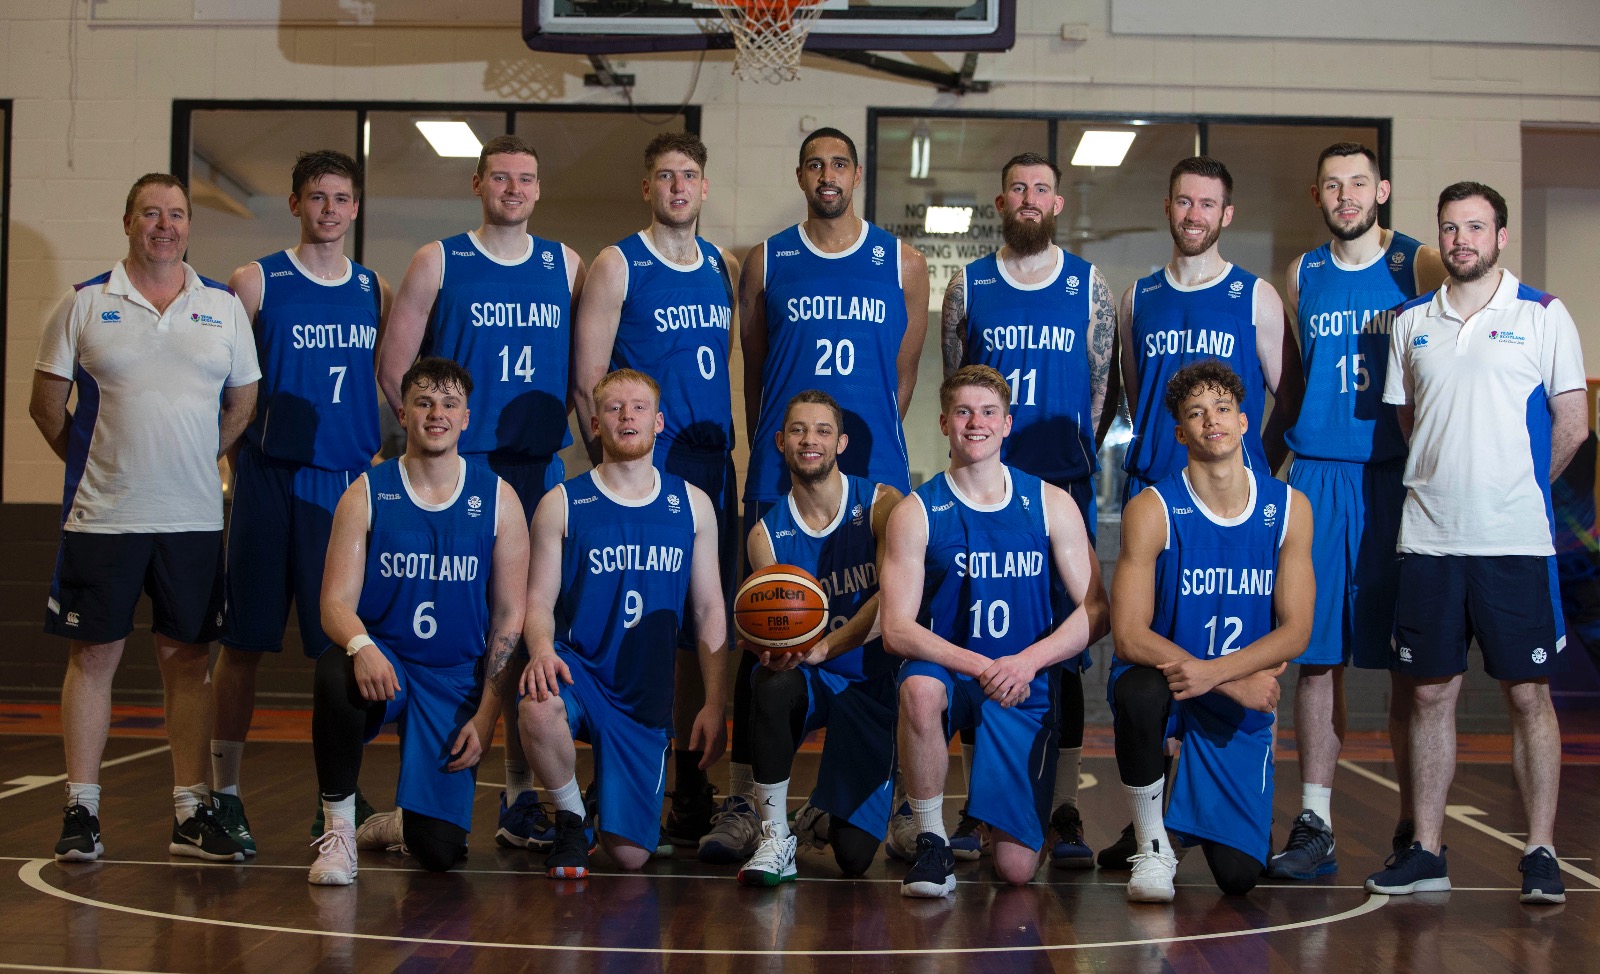 Scotland take victory against England in first game at Gold Coast – Basketball Scotland